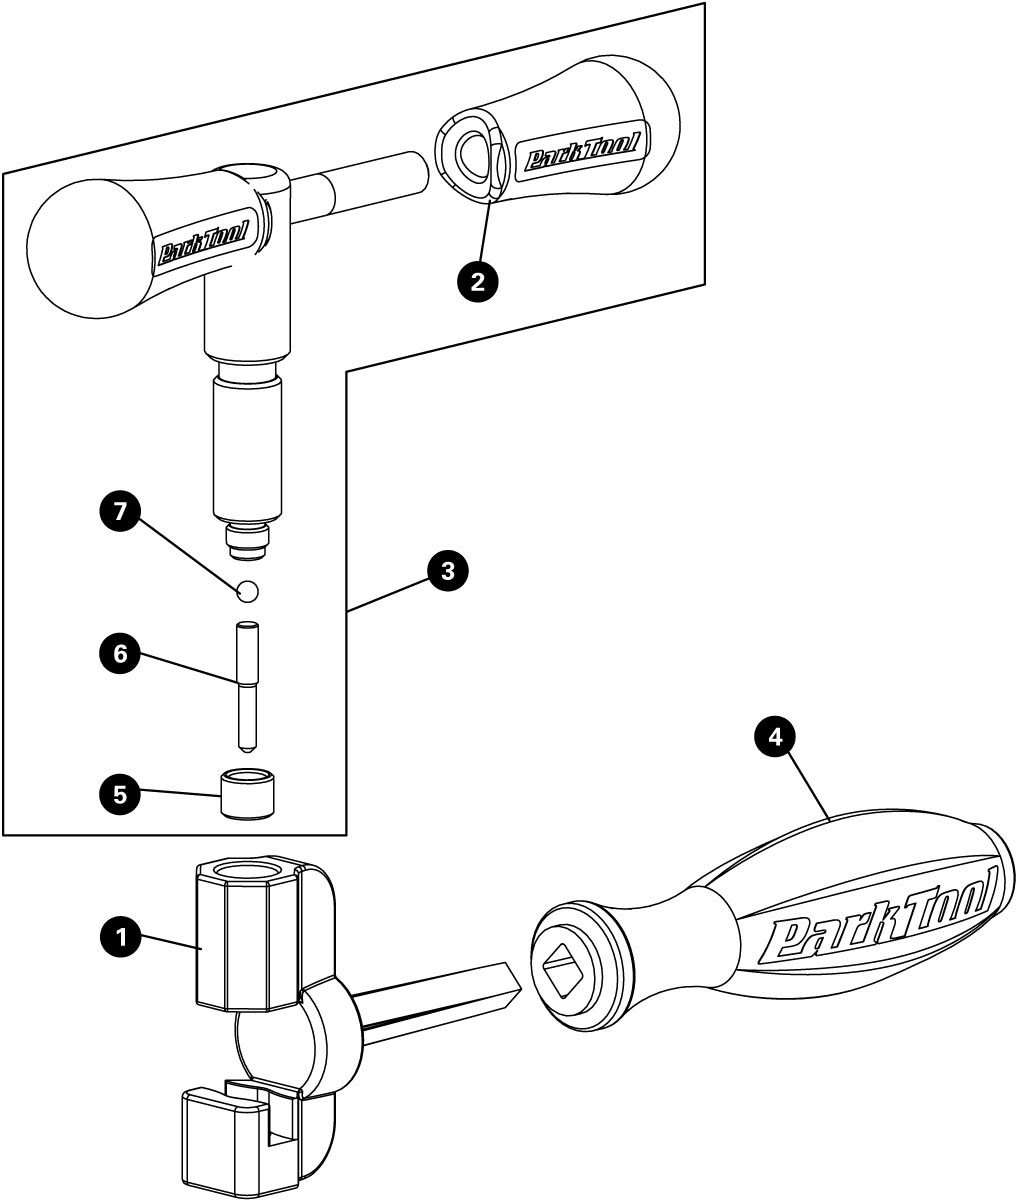 Parts diagram for CT-11 Rivet Peening Tool for Campagnolo® 11-Speed Chain, click to enlarge